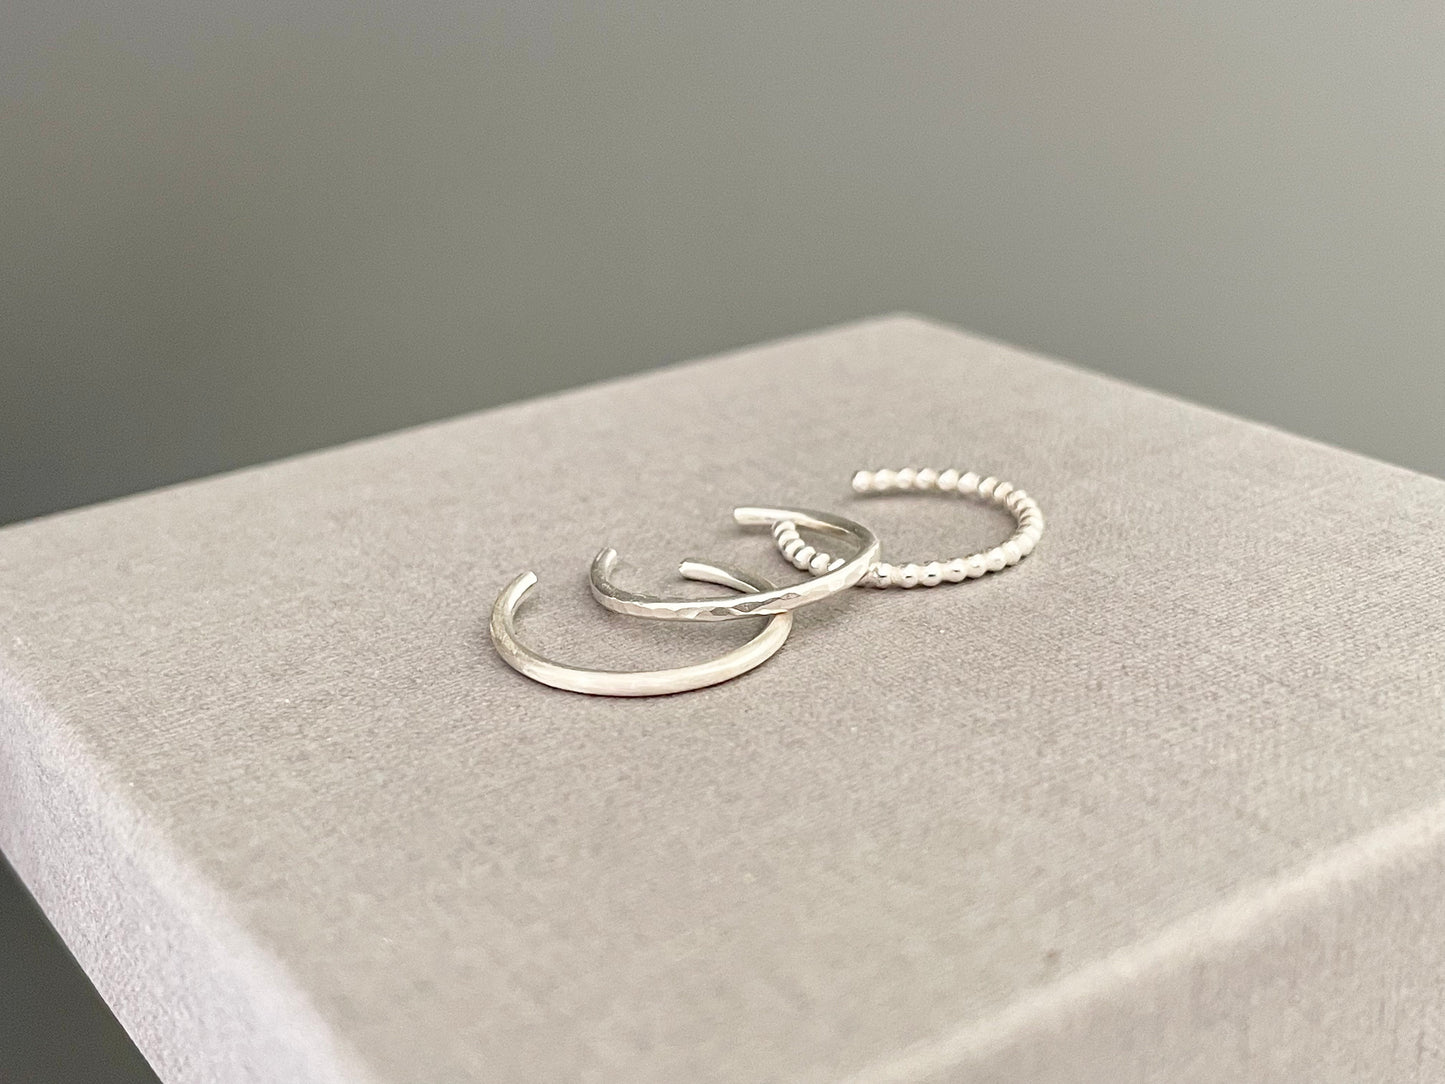 Sterling silver toe ring set